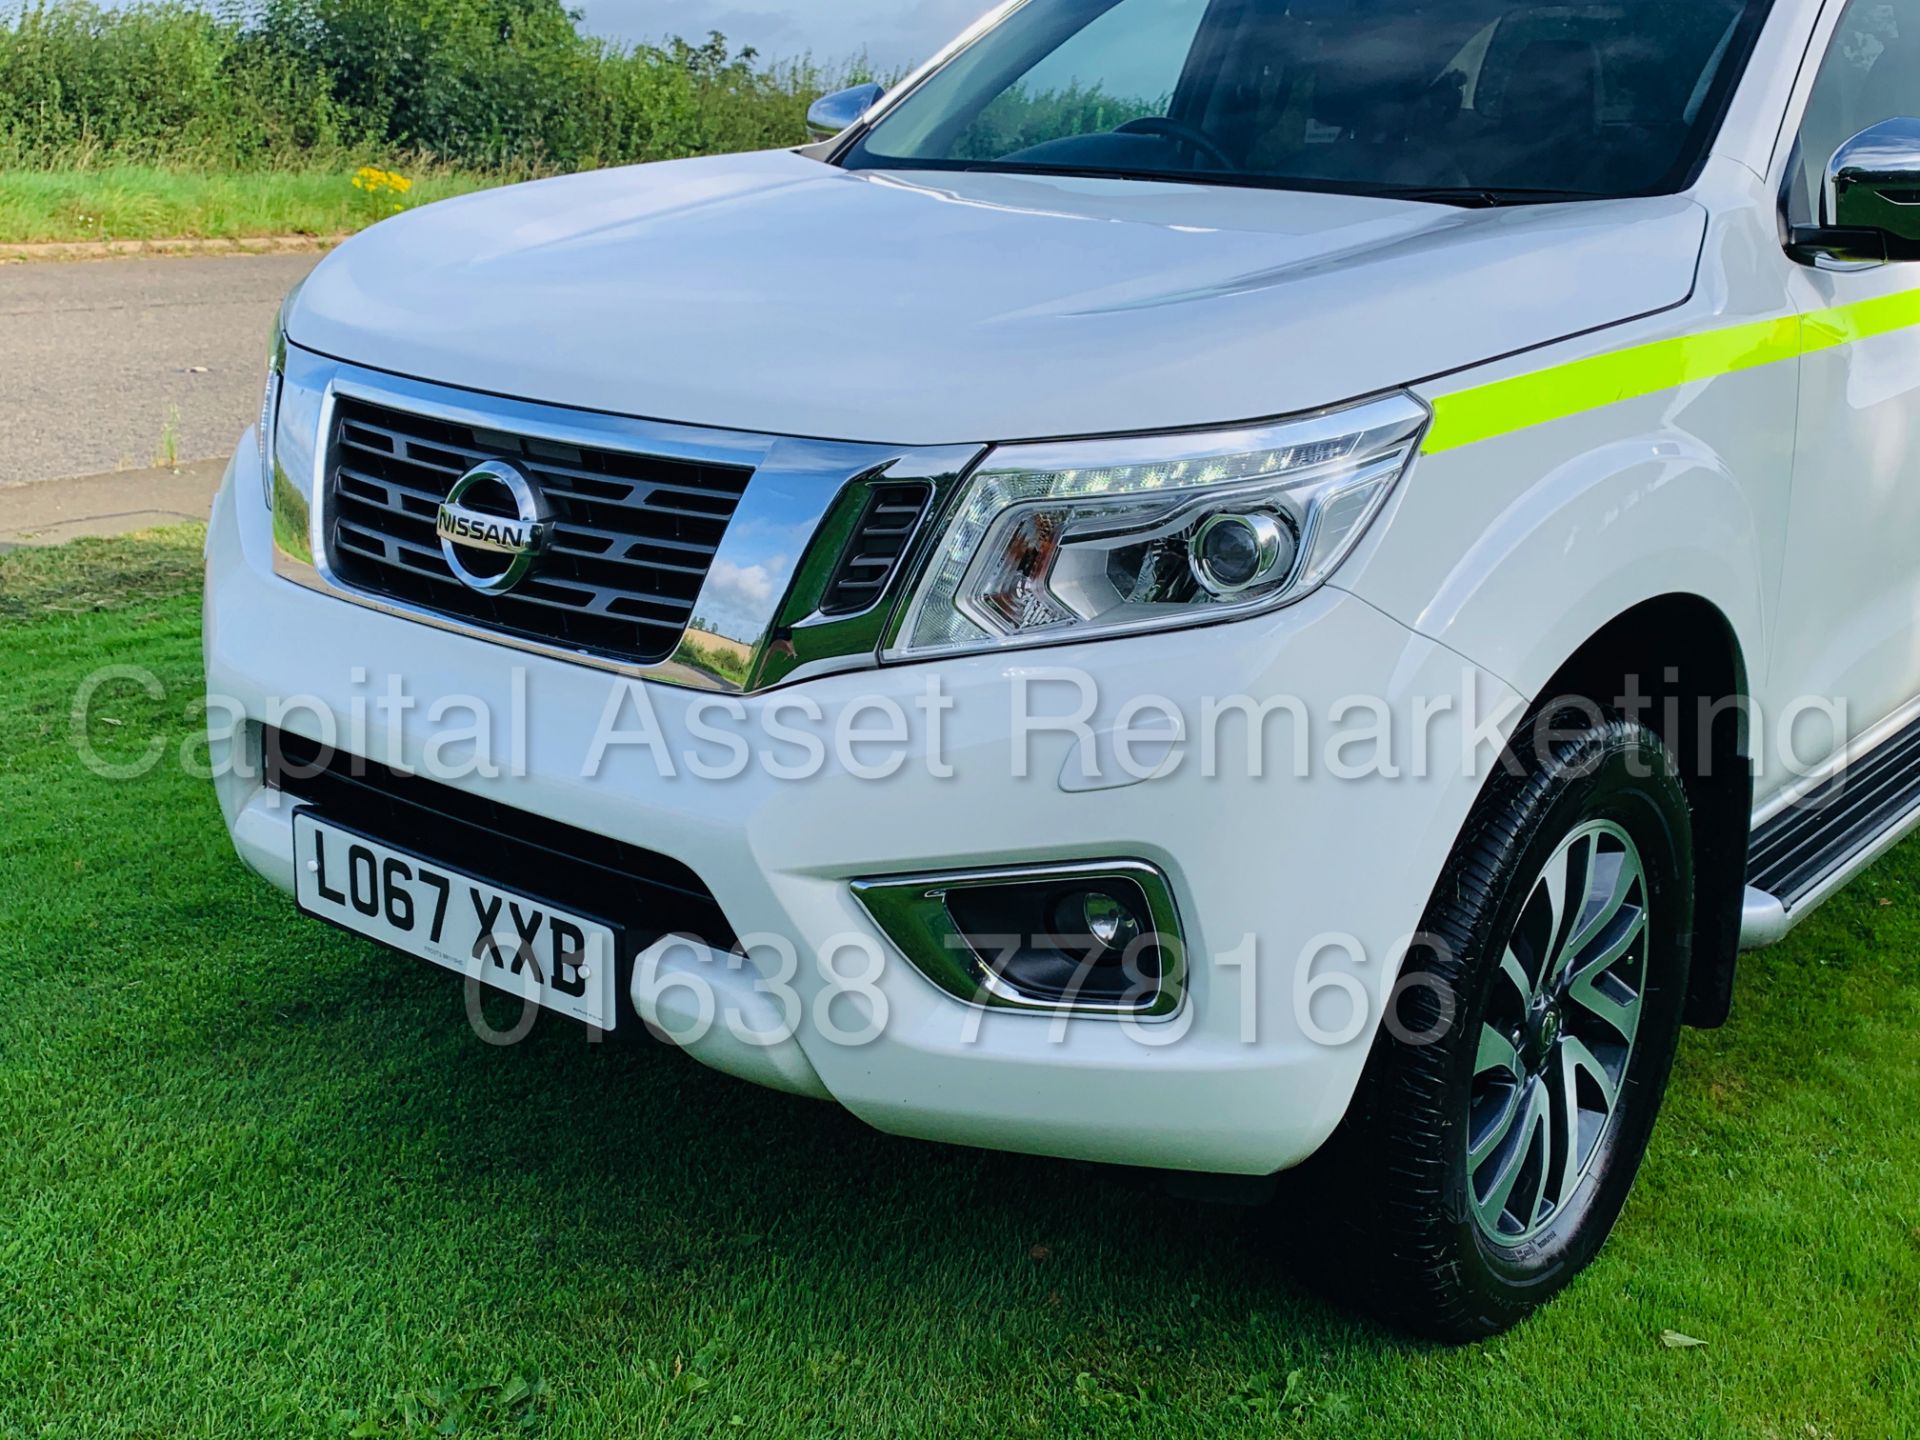 (On Sale) NISSAN NAVARA *TEKNA EDITION* DOUBLE CAB PICK-UP (67 REG) '2.3 DCI - 6 SPEED' (1 OWNER) - Image 17 of 58